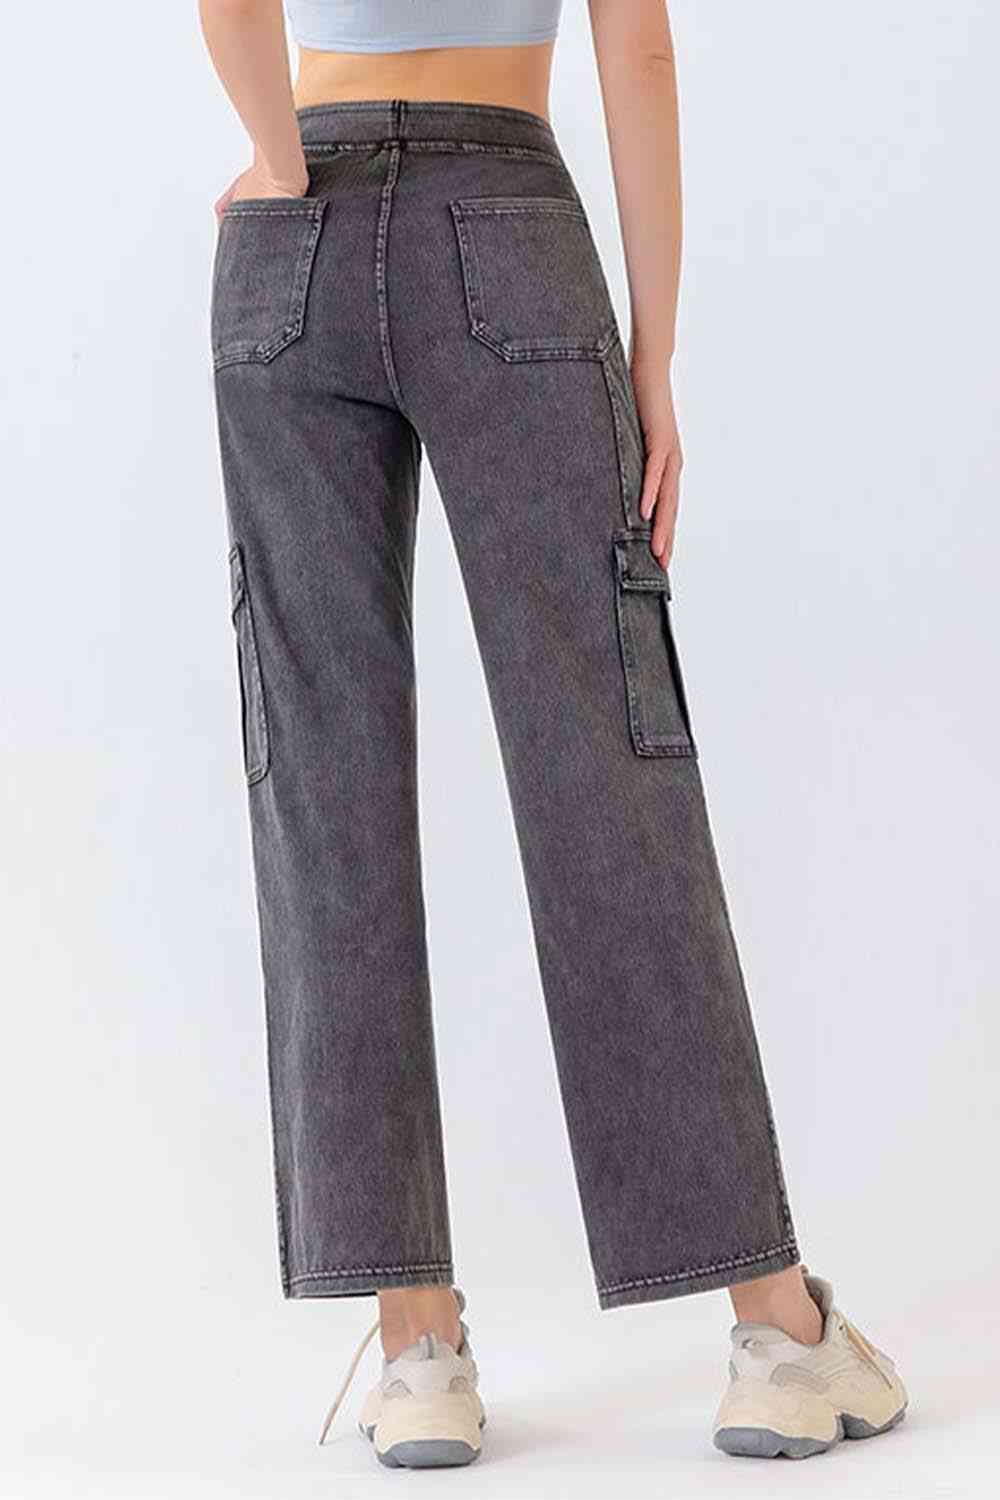 4 Colors - Buttoned Pocketed Long Jeans